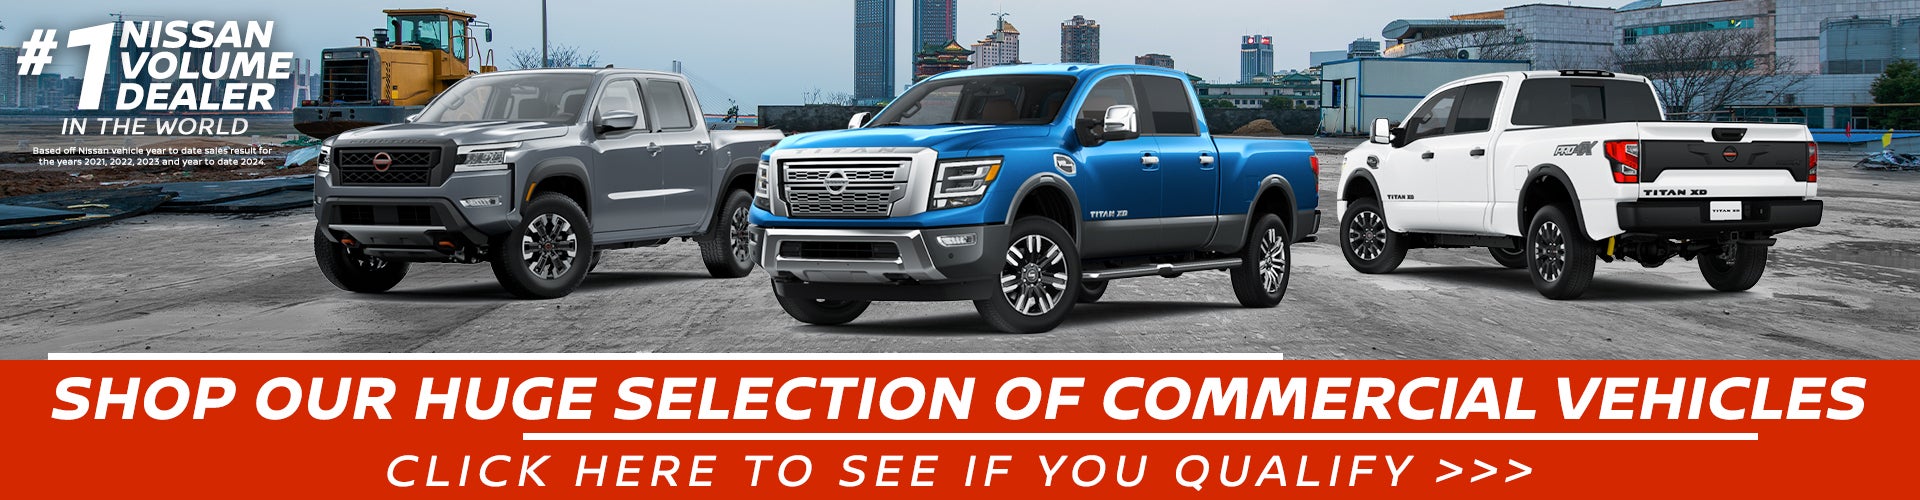 Shop our huge selection of commercial vehicles 